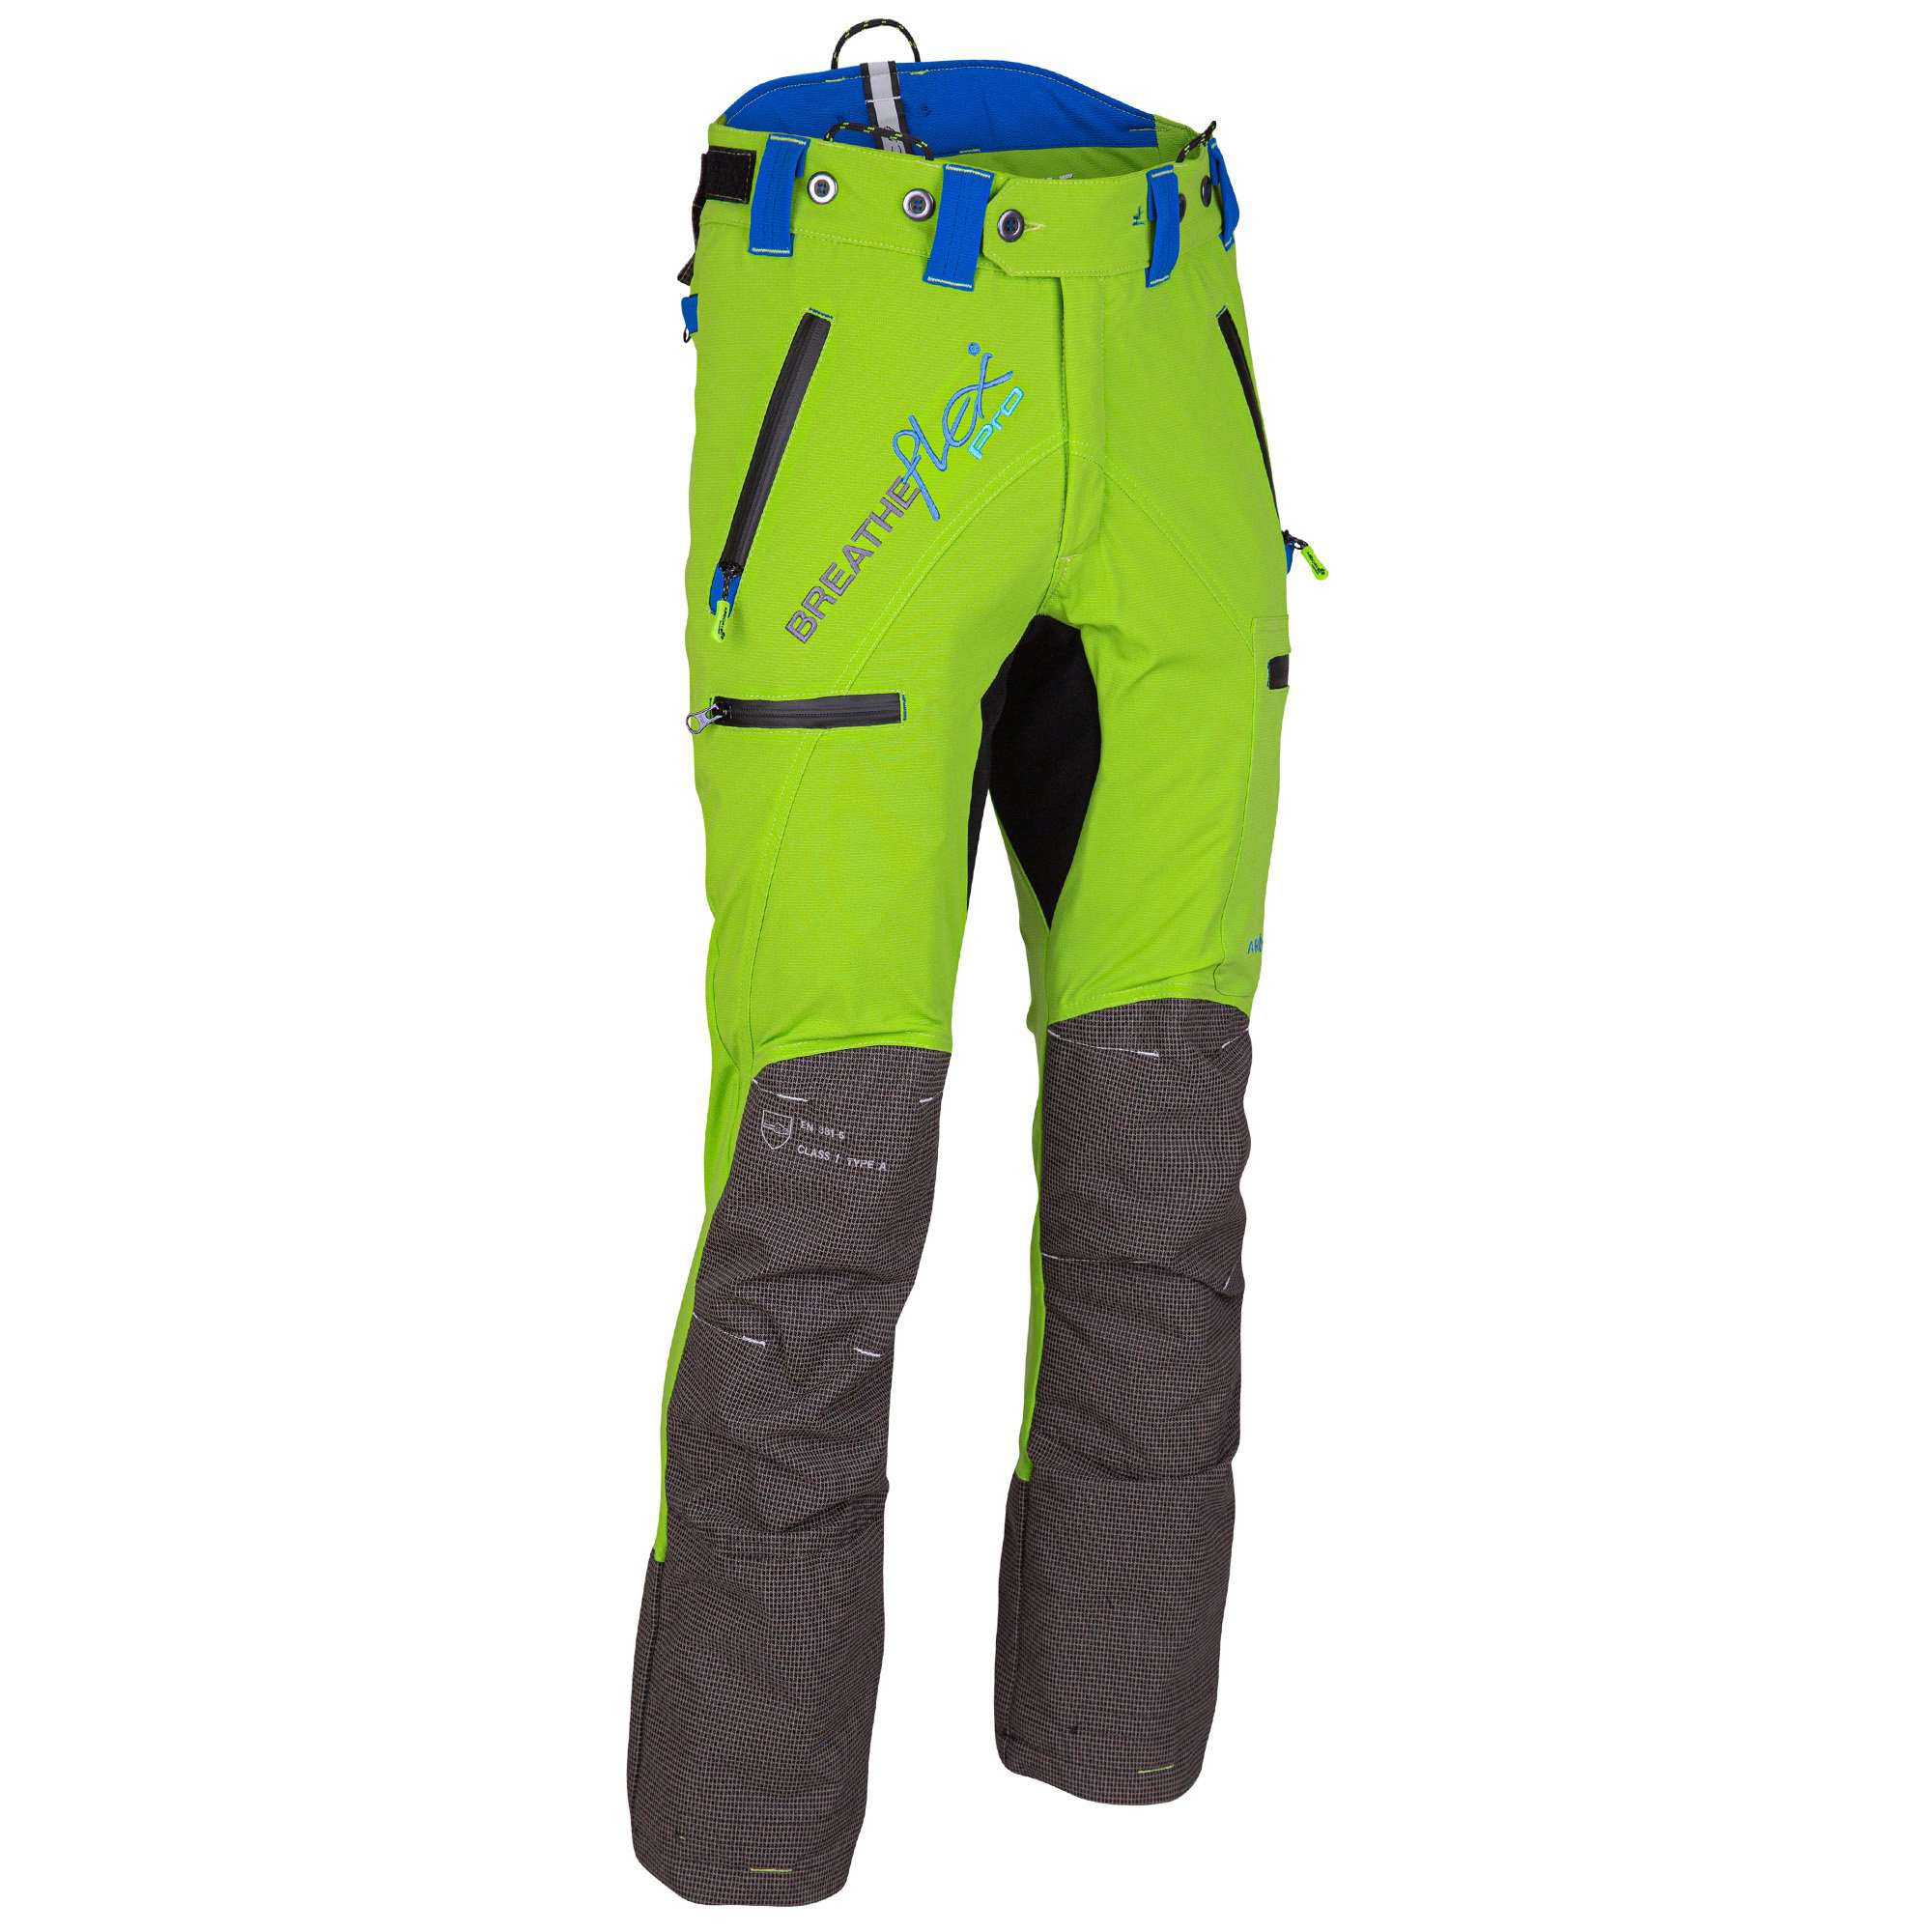 AT4060 Breatheflex Pro Type A Class 1 Chainsaw Trousers - Lime - Arbortec Forestwear